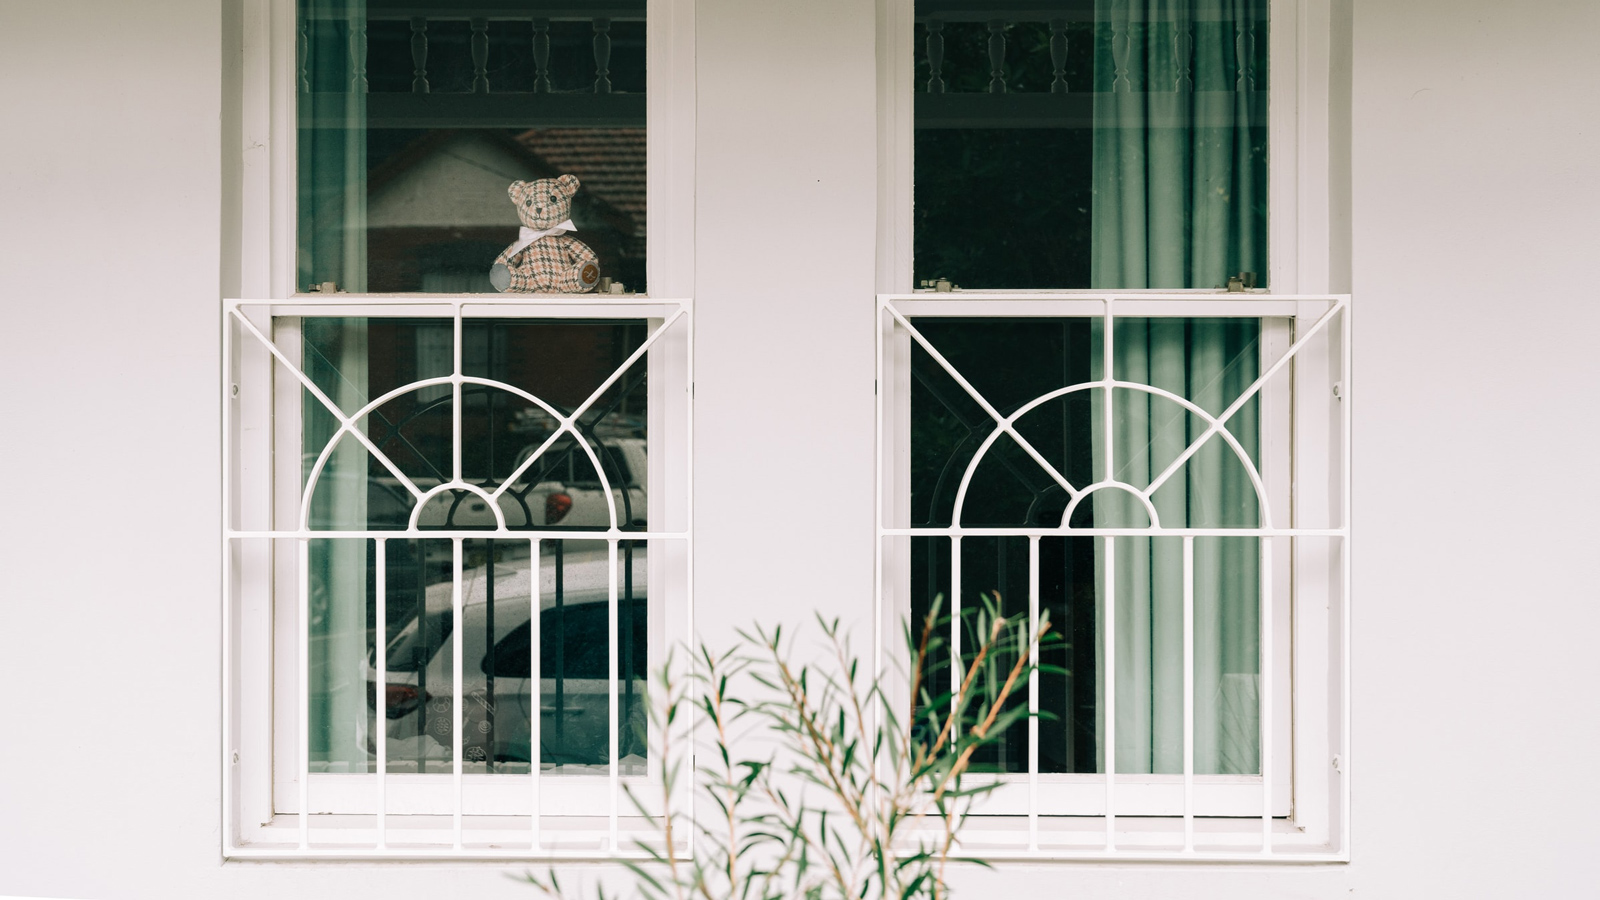 Photo of a teddy bear in a window on a white-painted house